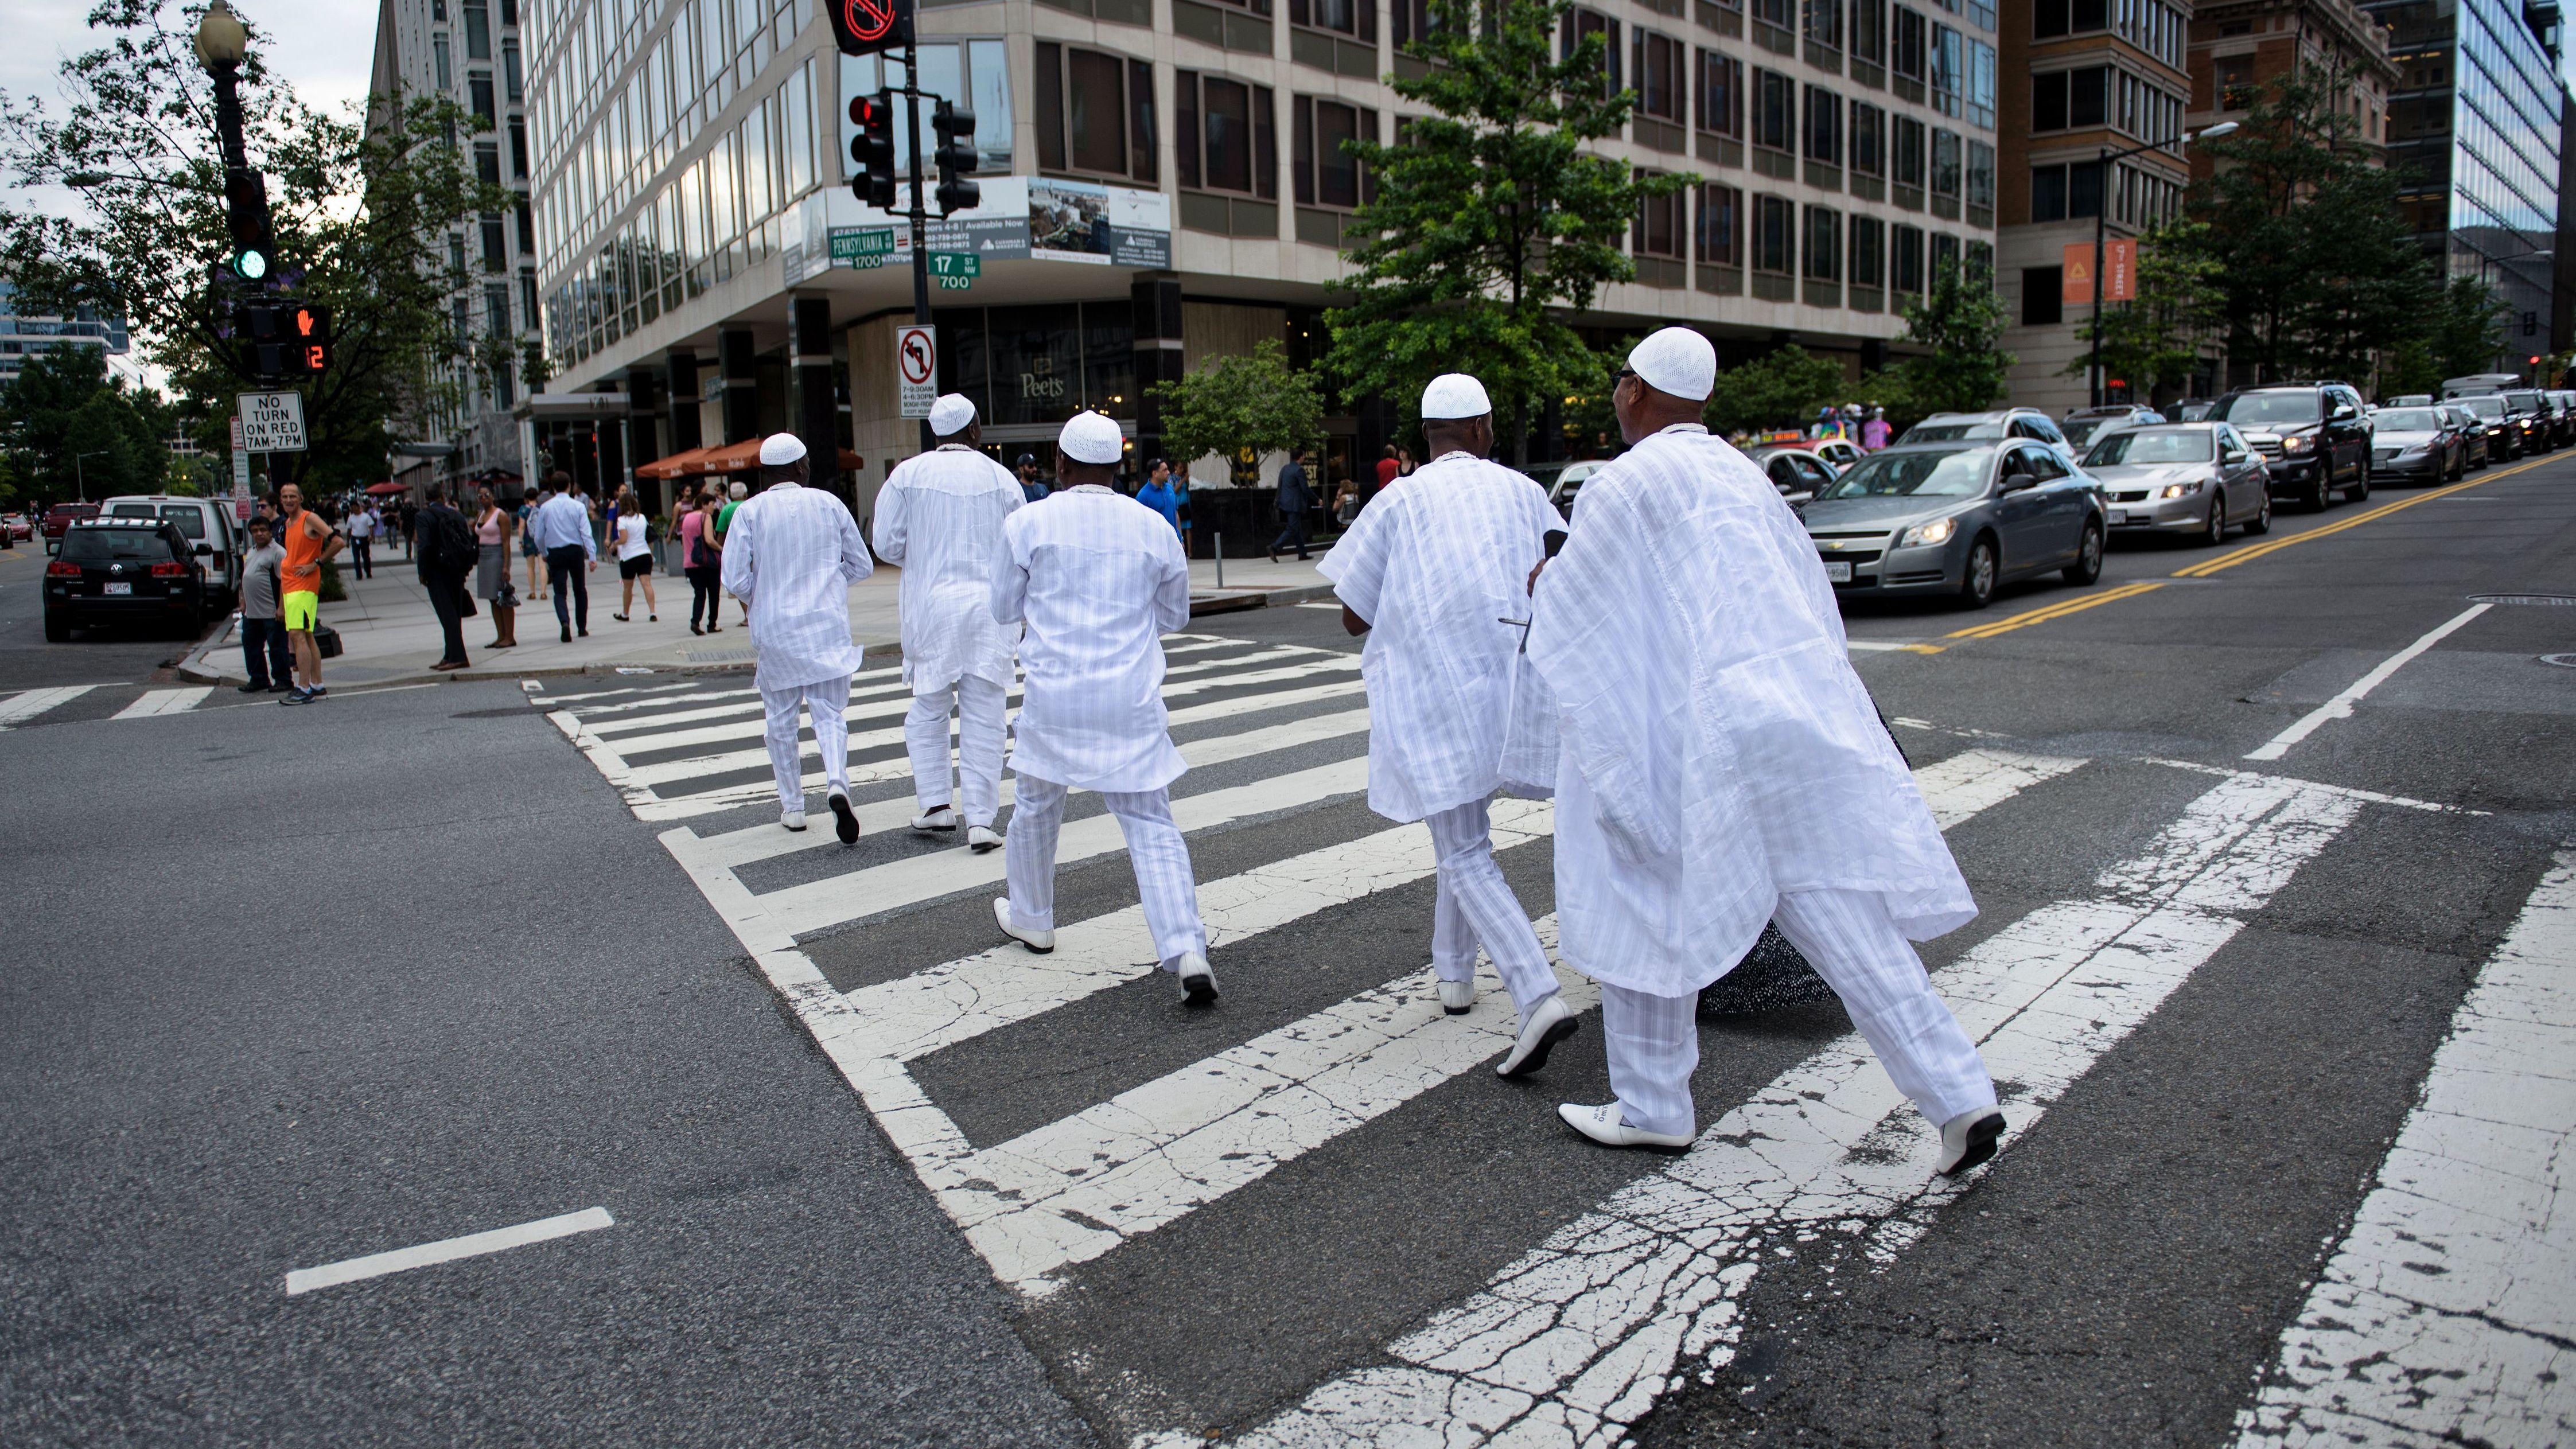 The Ooni of Ife is escorted across 17th Street near the White House June 22, 2016 in Washington, DC. His Majesty is keen to visit as many places as possible to "connect the dots" between Nigerian cultural heritage and the rest of the world. 